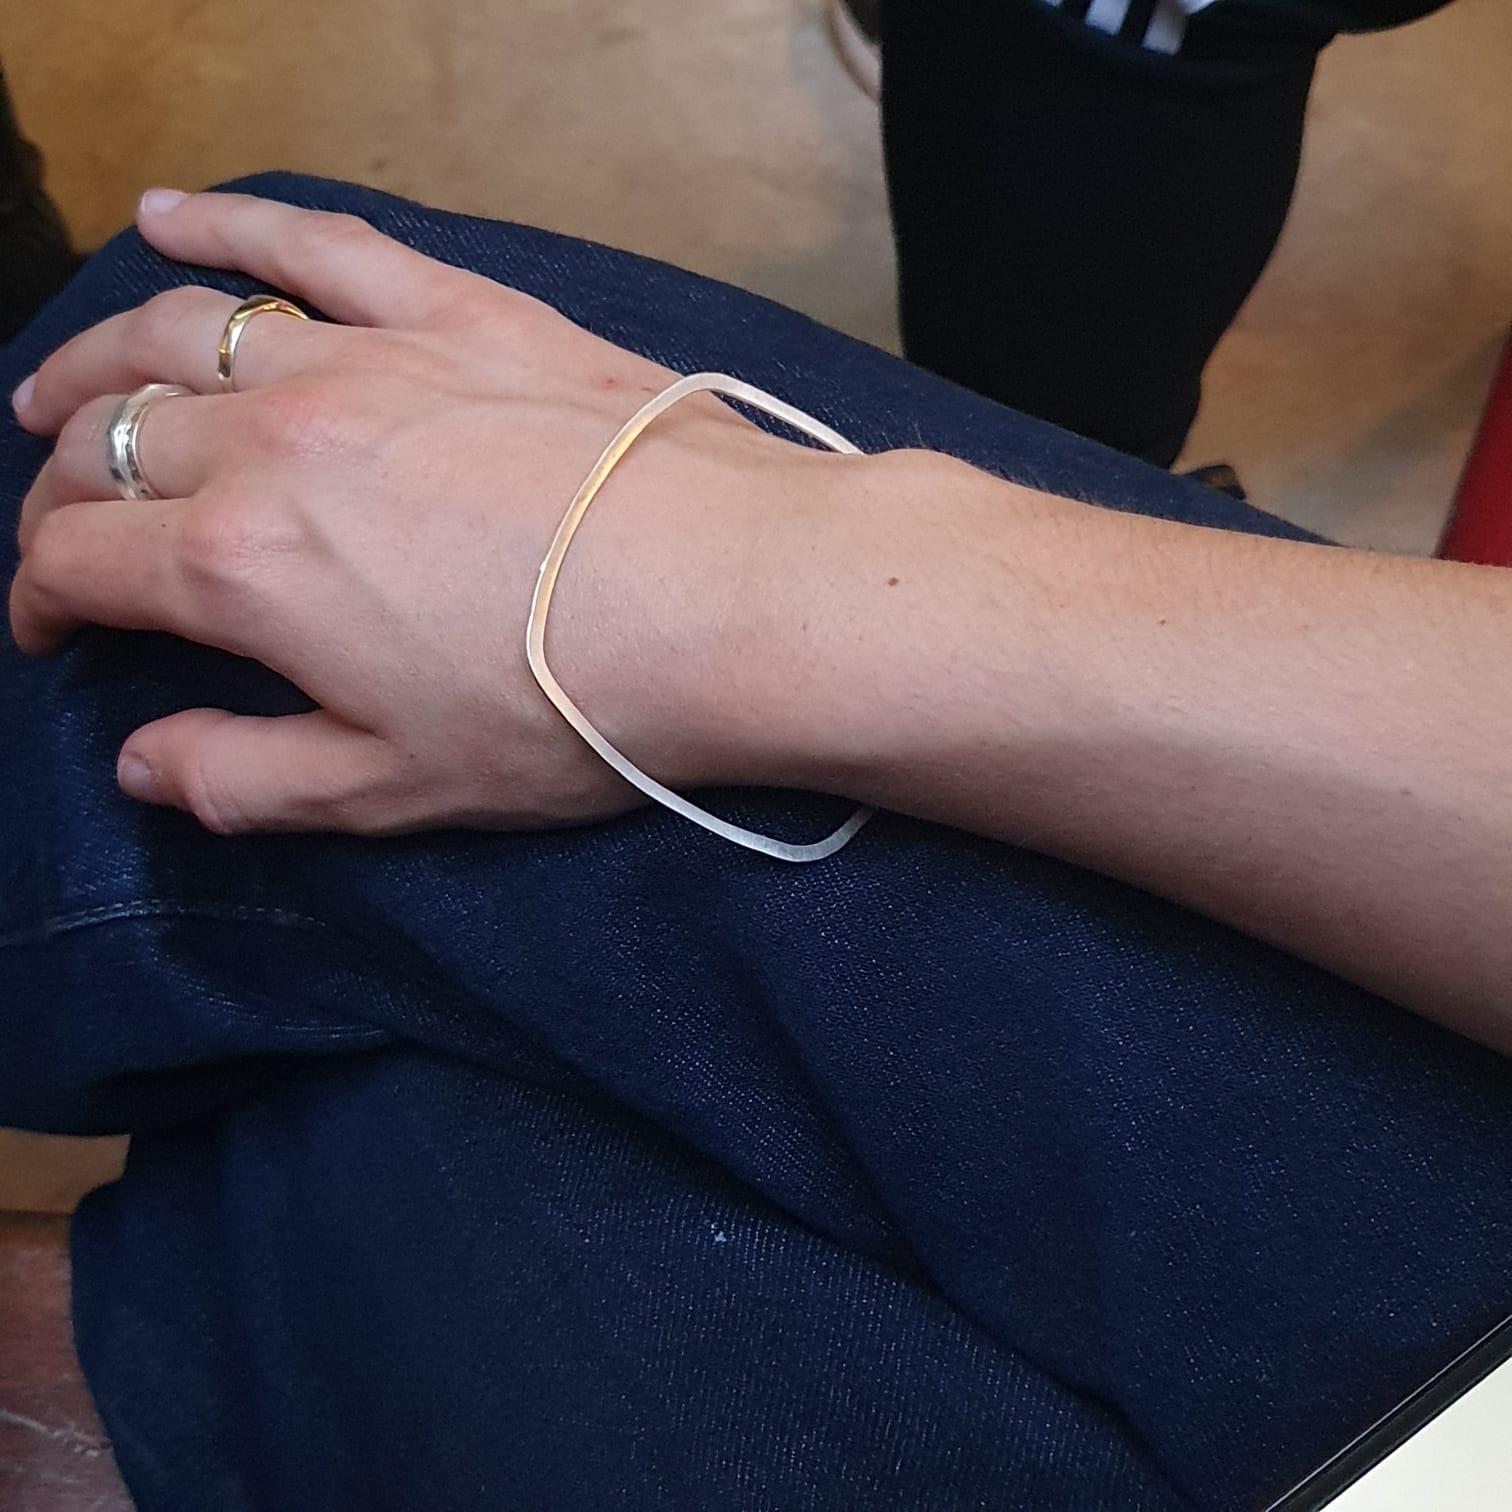 This delicate bangle is perfect for everyday and to wear alone or as a stacker. It is made from gold plated recycled sterling silver and is finished in a matte sheen with shiny burnished edges to subtly catch the light when worn.

It is hallmarked